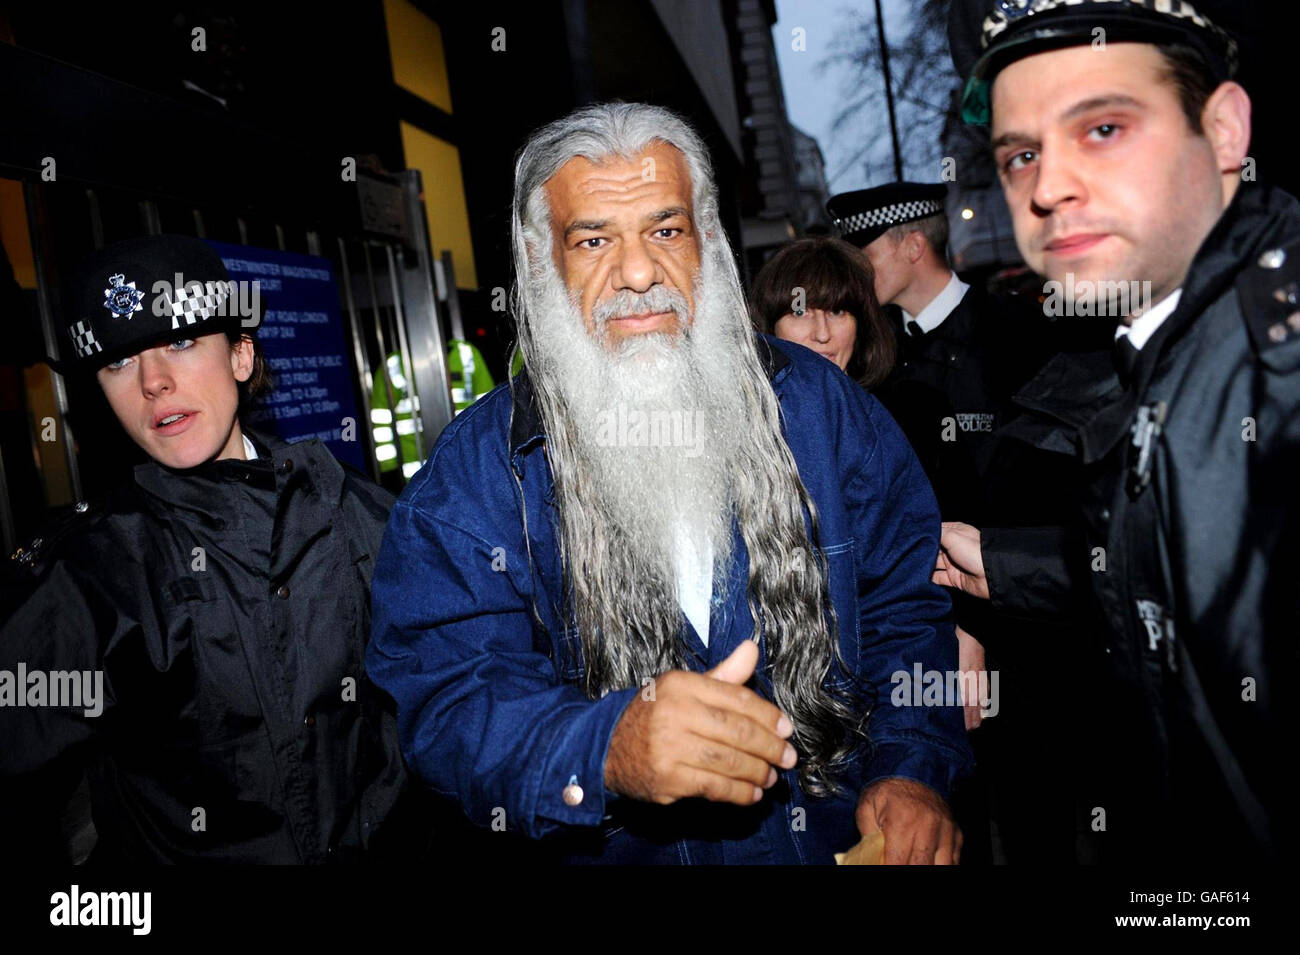 Former Guantanamo detainee Jamil el-Banna leaves City of Westminster Magistrates Court in London today after being given bail. Stock Photo